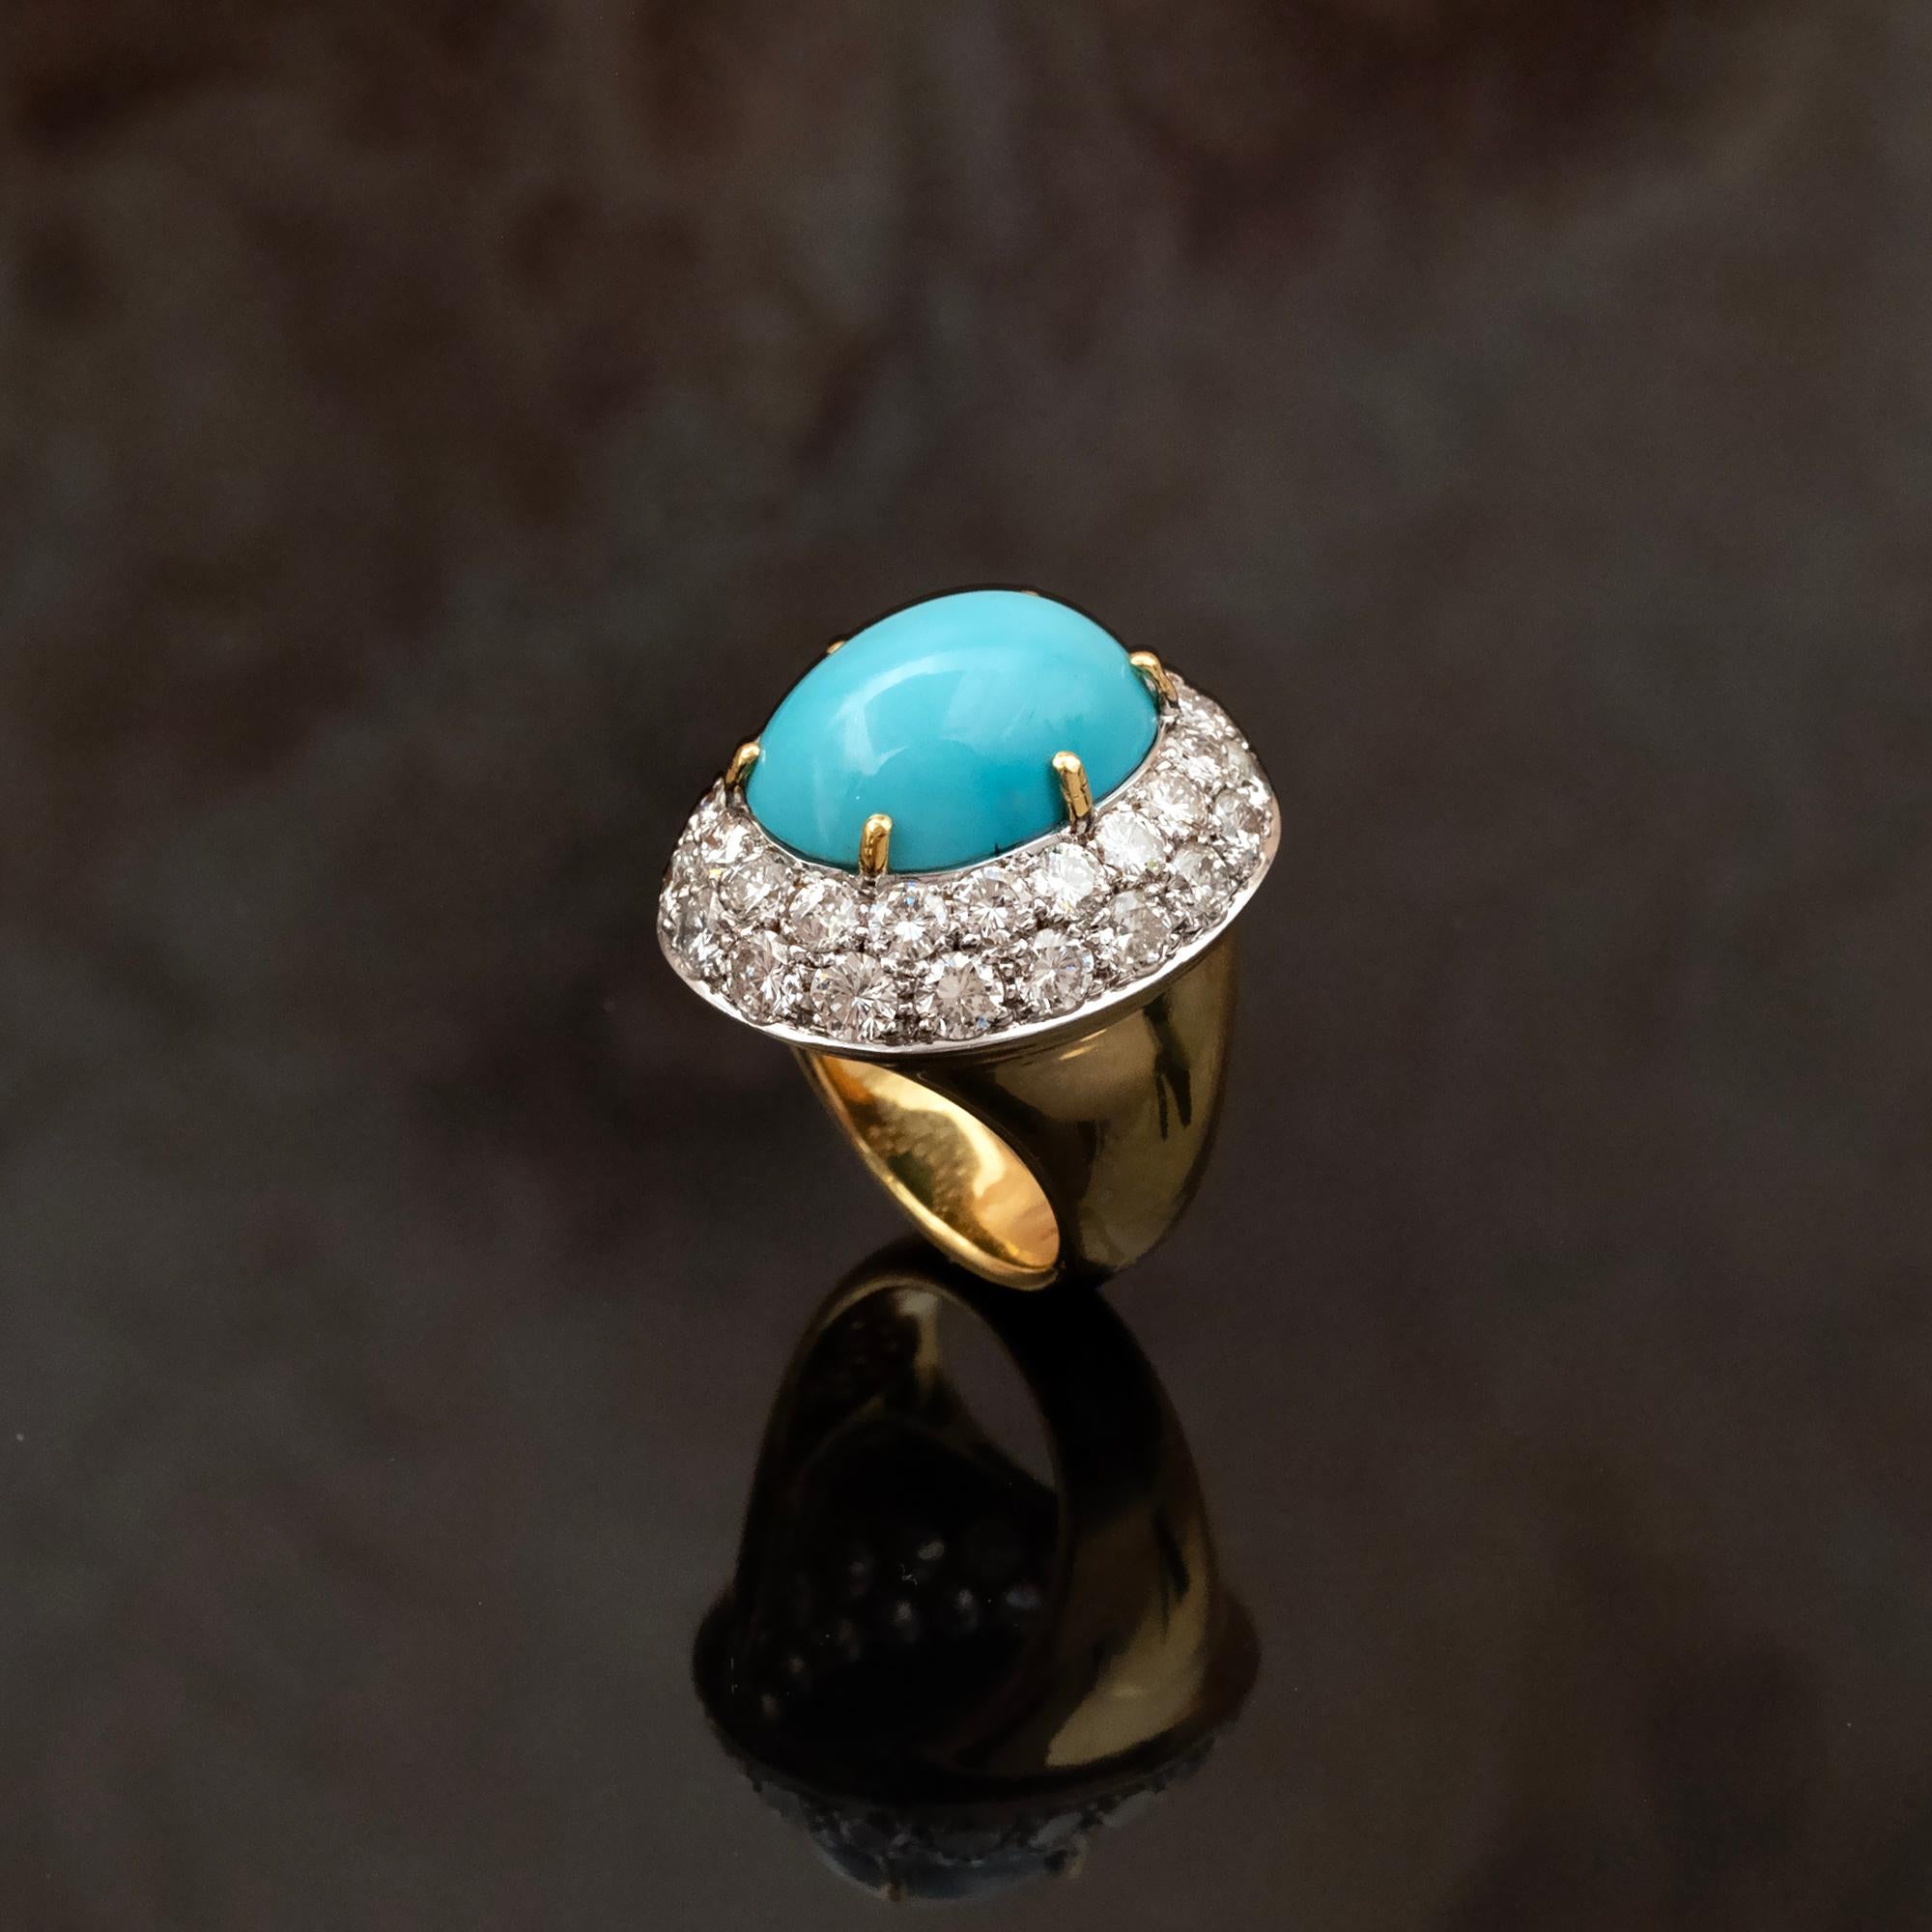 Introducing an exquisite Large Dome Shaped Cocktail Ring, a true masterpiece of Haute Joaillerie craftsmanship. 
At its heart lies a  17 x 12.3 mm. turquoise gemstone, displaying the perfect and most desired hue for turquoise. Surrounding this